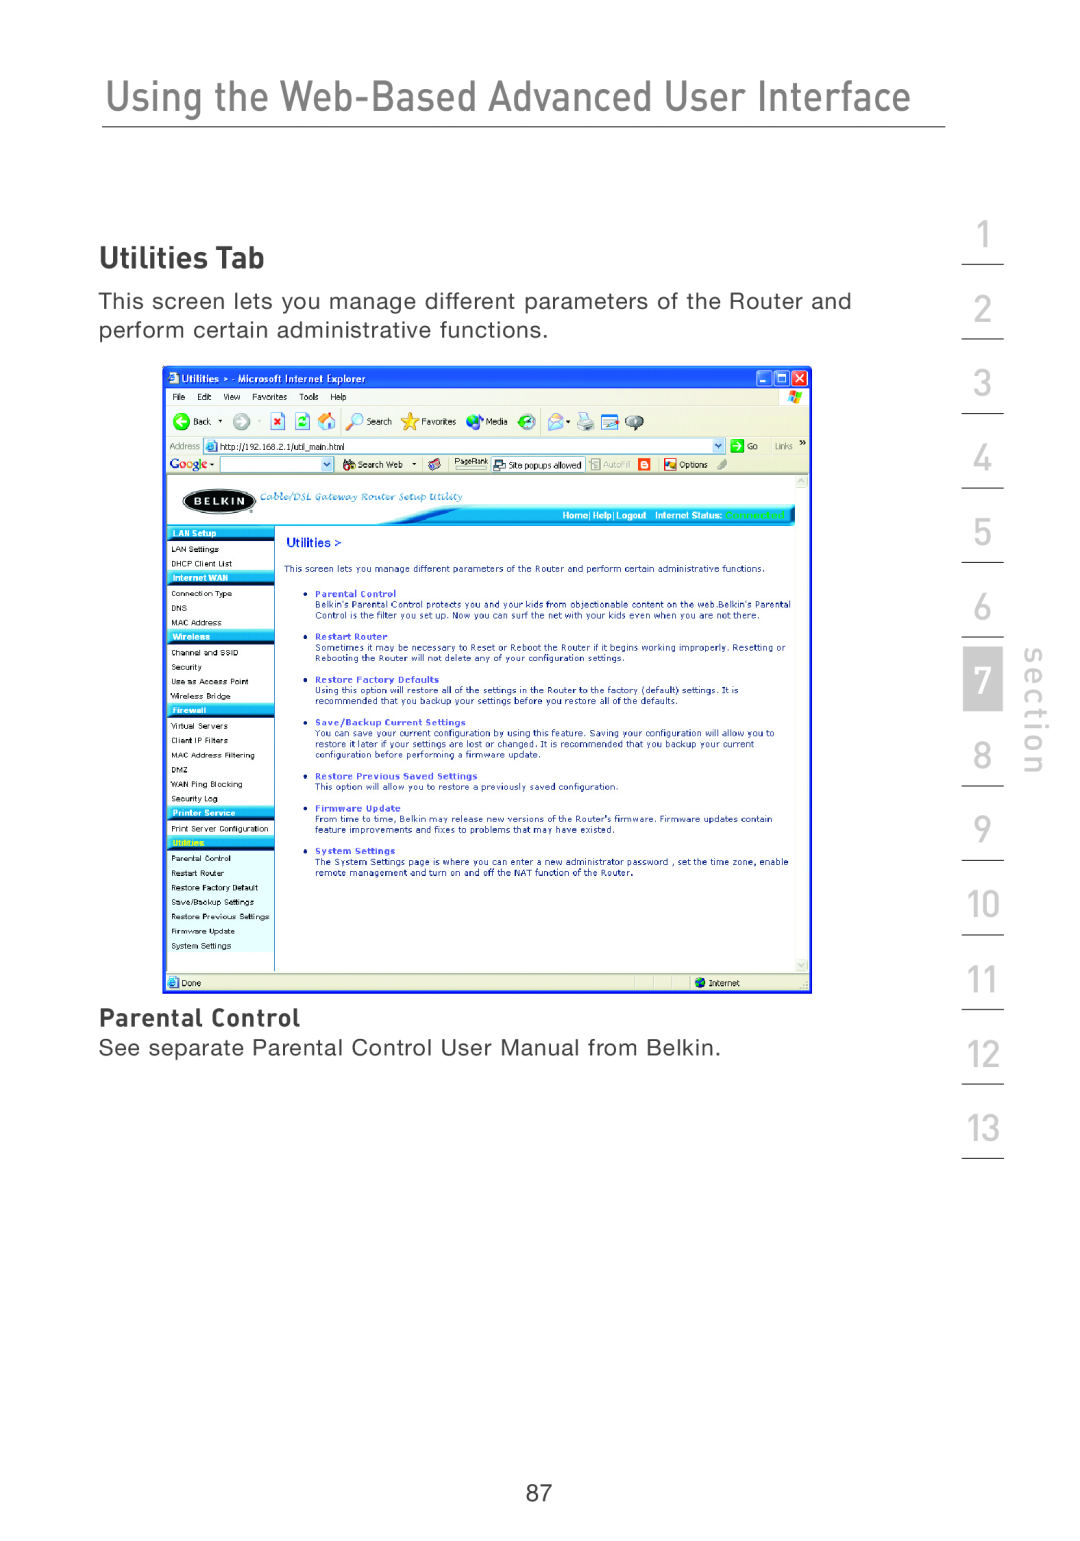 Belkin F5D7231-4P user manual Utilities Tab, Parental Control, Using the Web-Based Advanced User Interface, section 